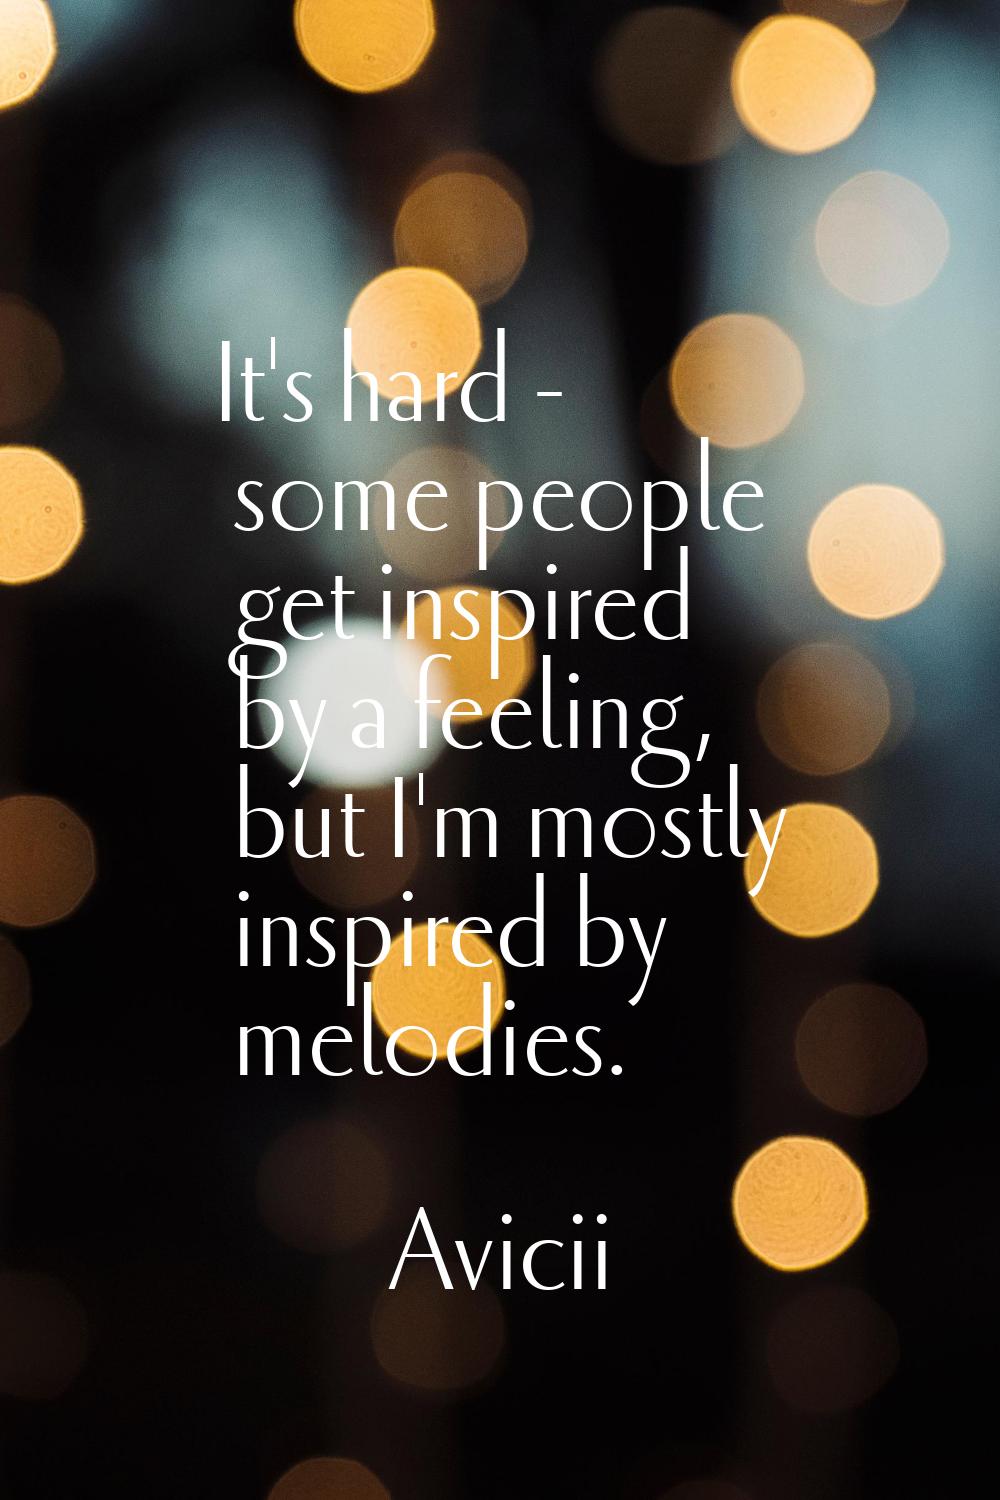 It's hard - some people get inspired by a feeling, but I'm mostly inspired by melodies.